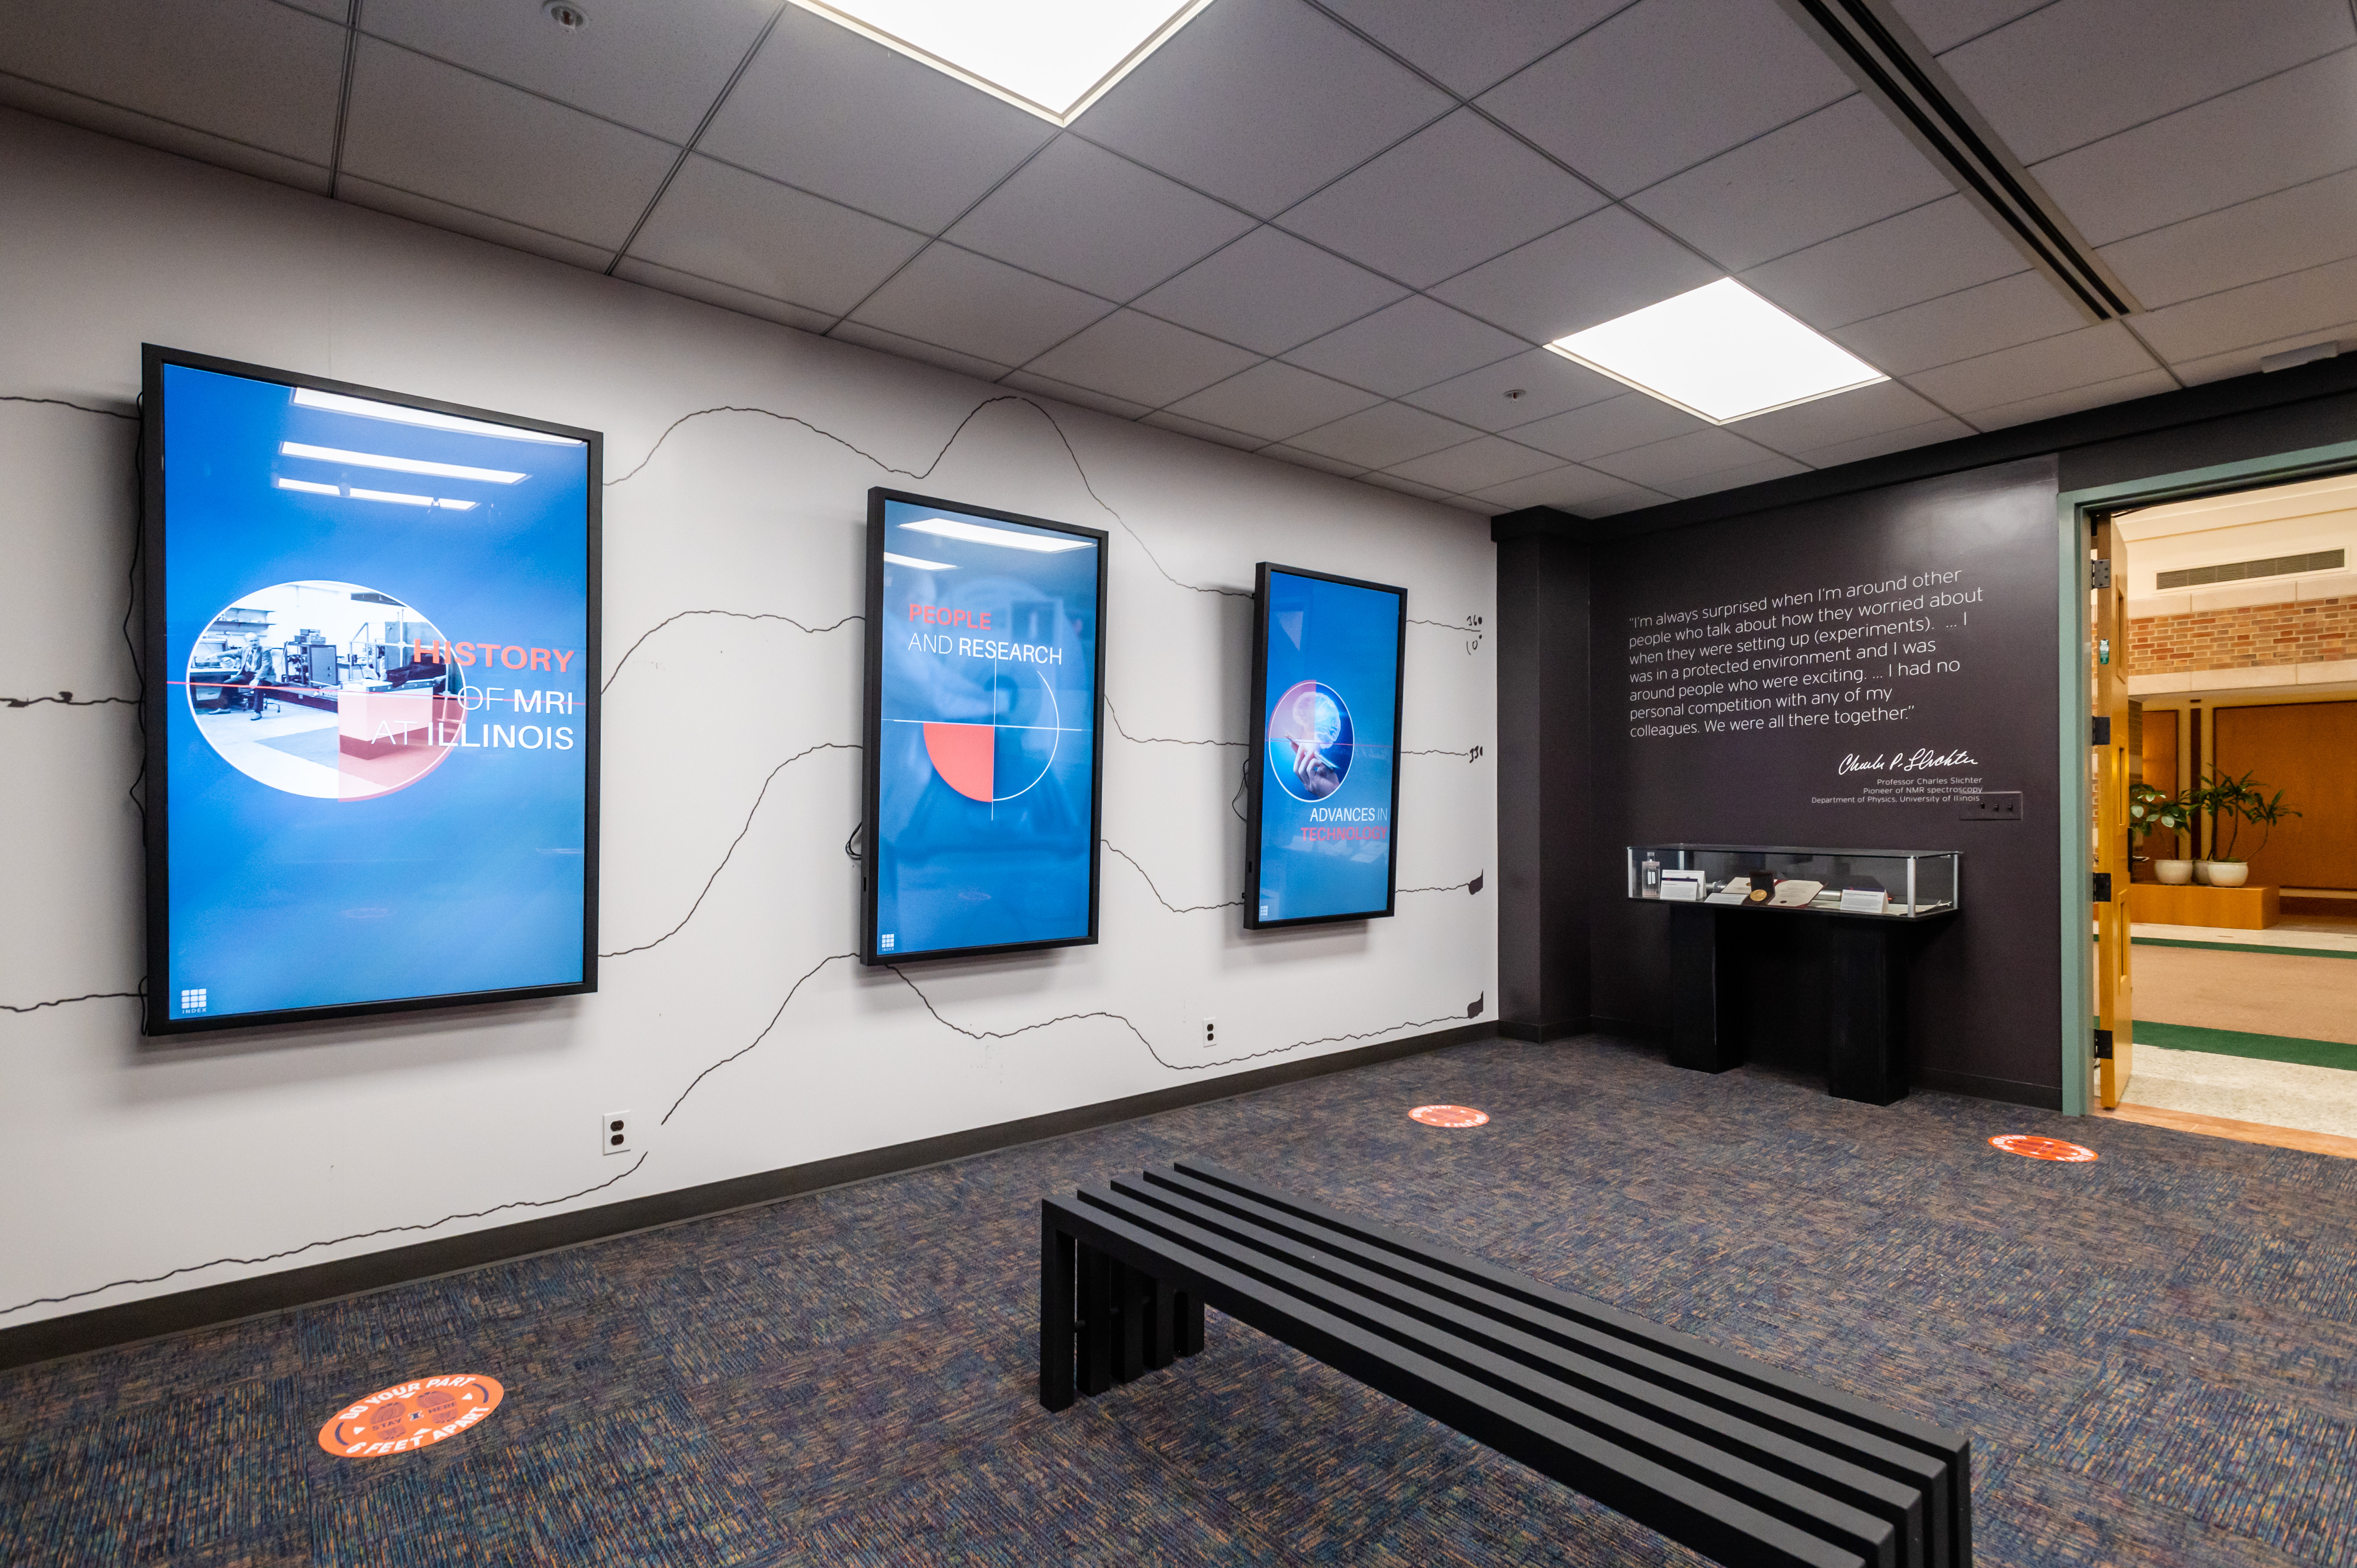 Three digital screens provide information about the history of MRI at Illinois in the Illinois MRI Exhibit.